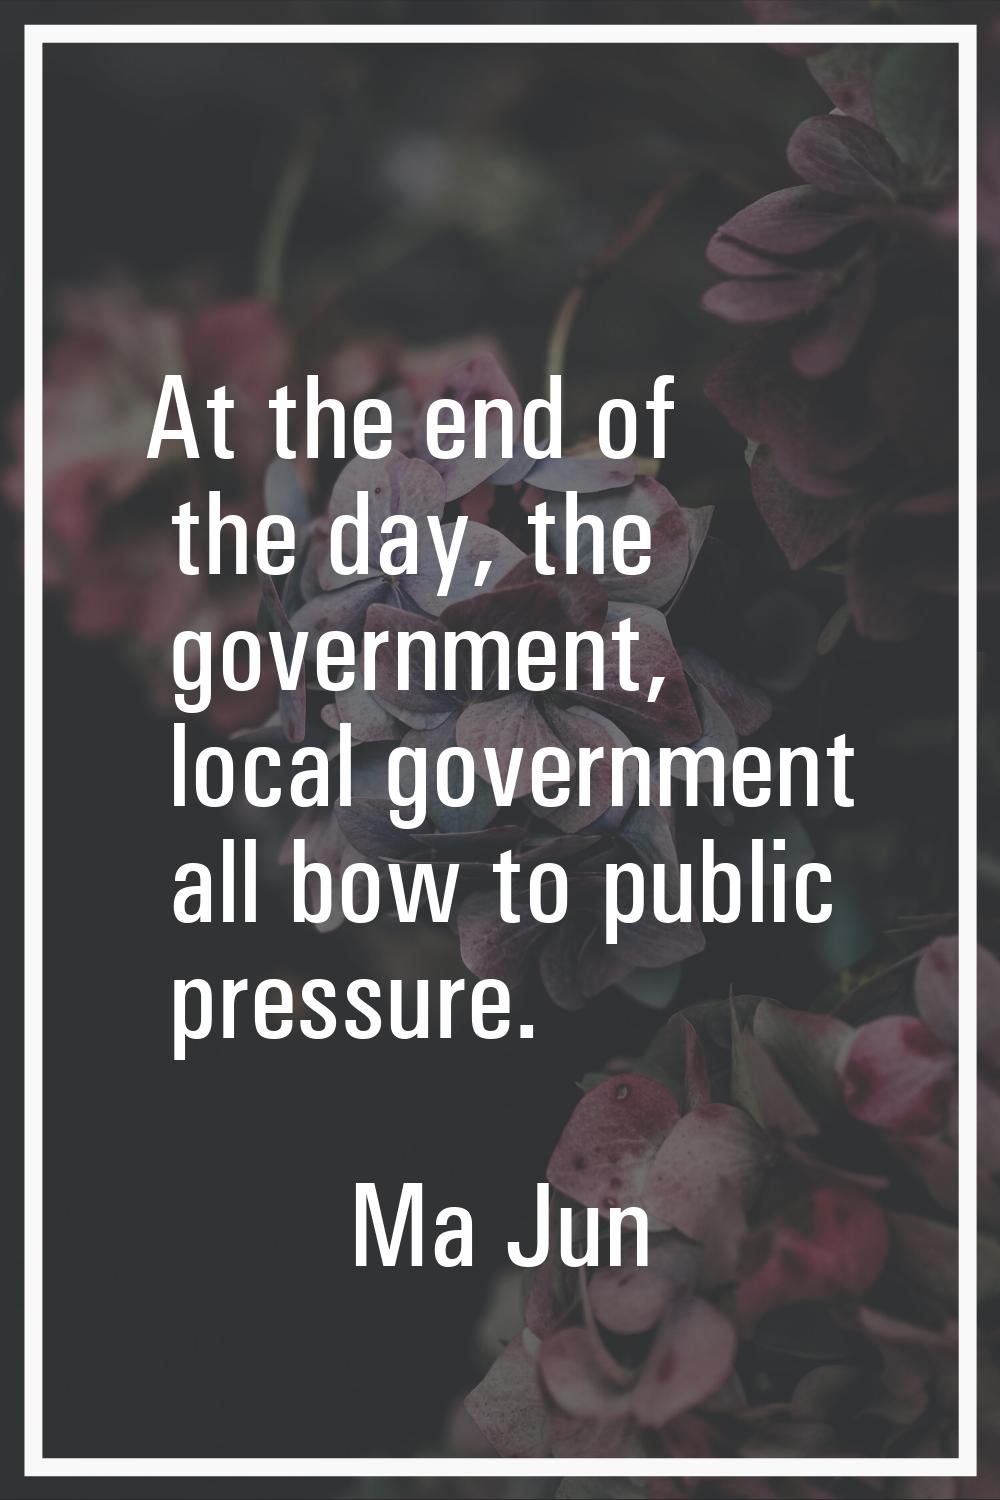 At the end of the day, the government, local government all bow to public pressure.